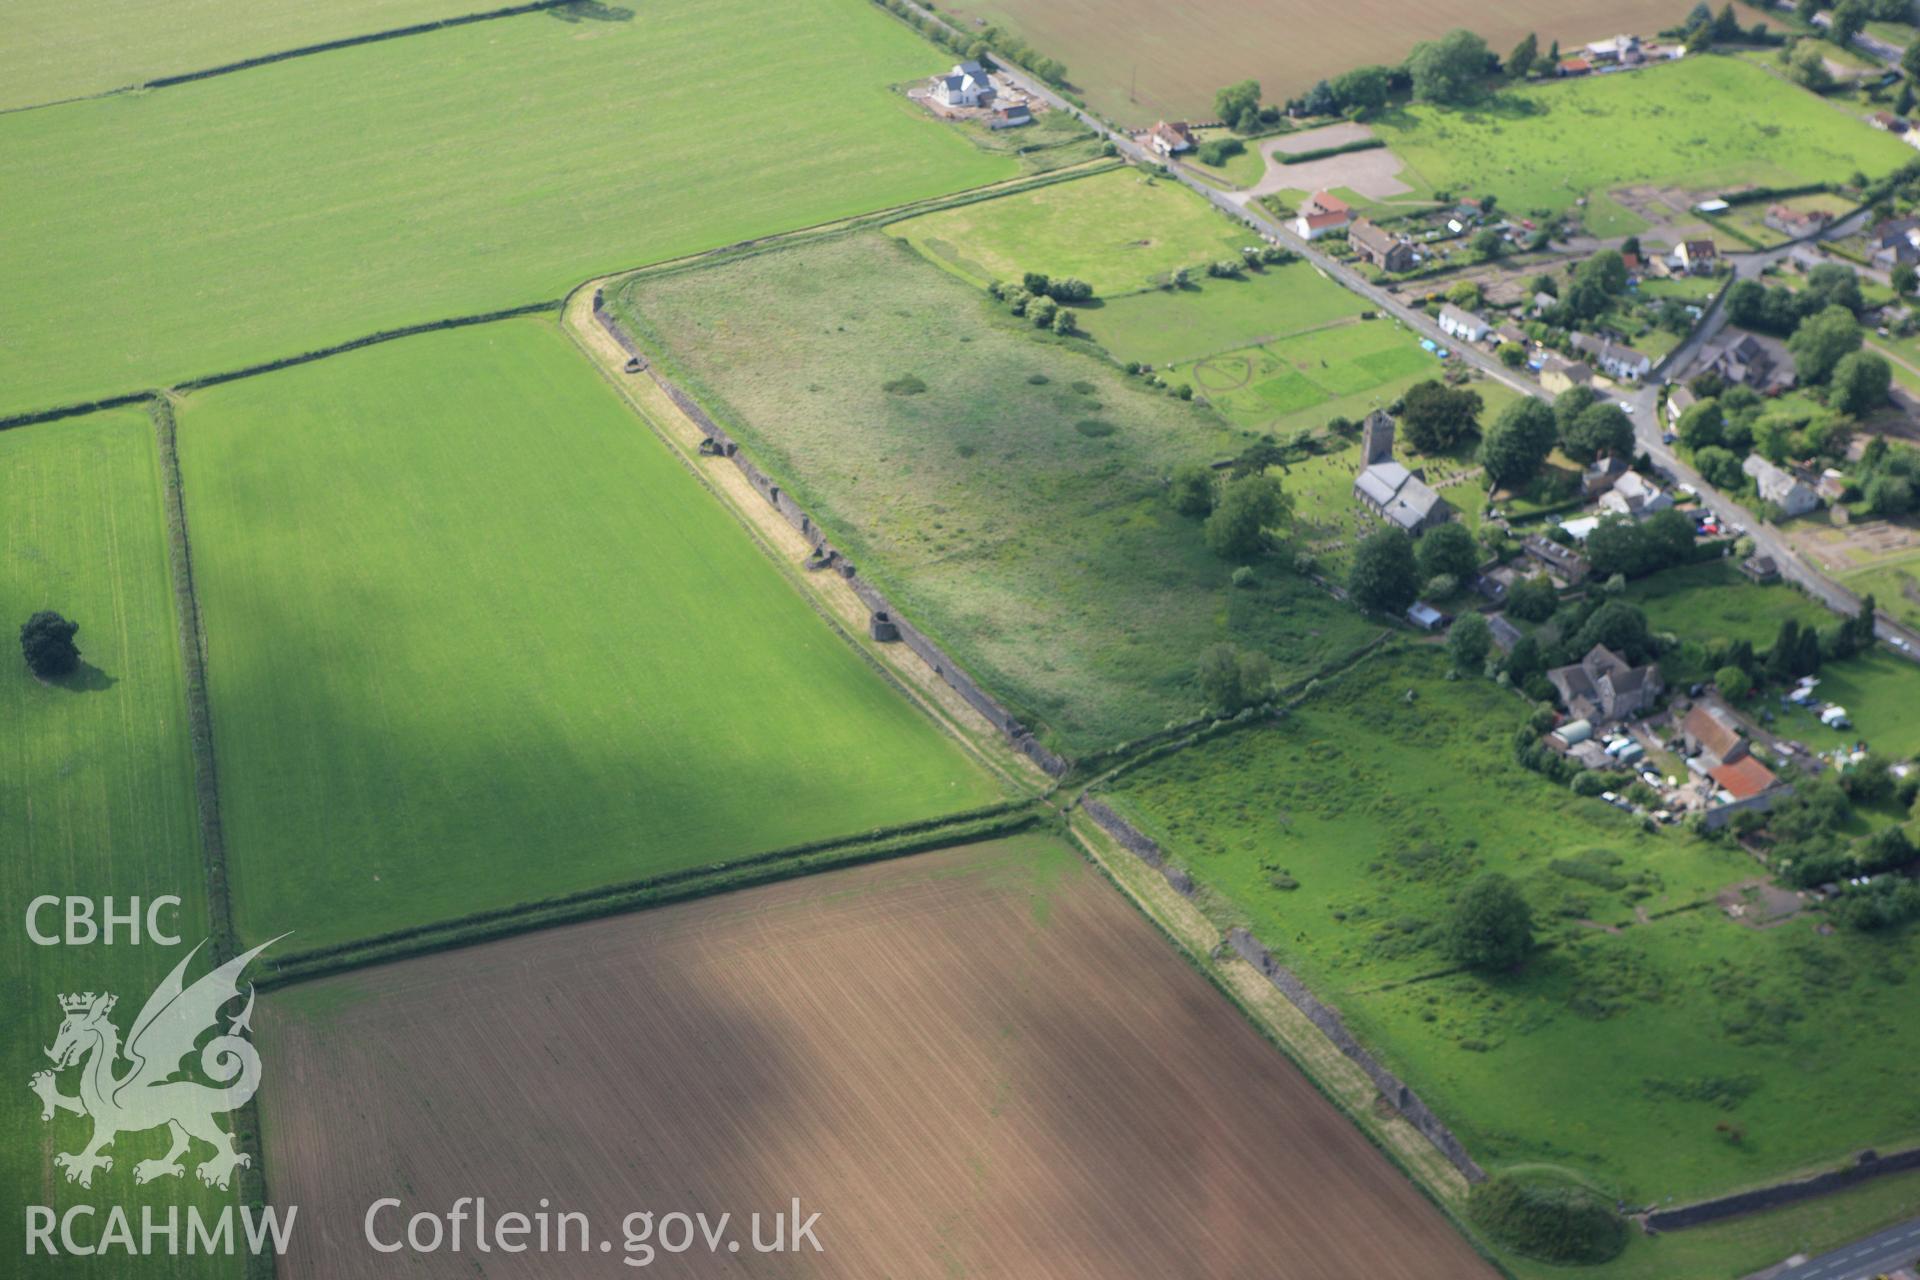 RCAHMW colour oblique aerial photograph of Caerwent Roman City, Venta Silurum. Taken on 11 June 2009 by Toby Driver